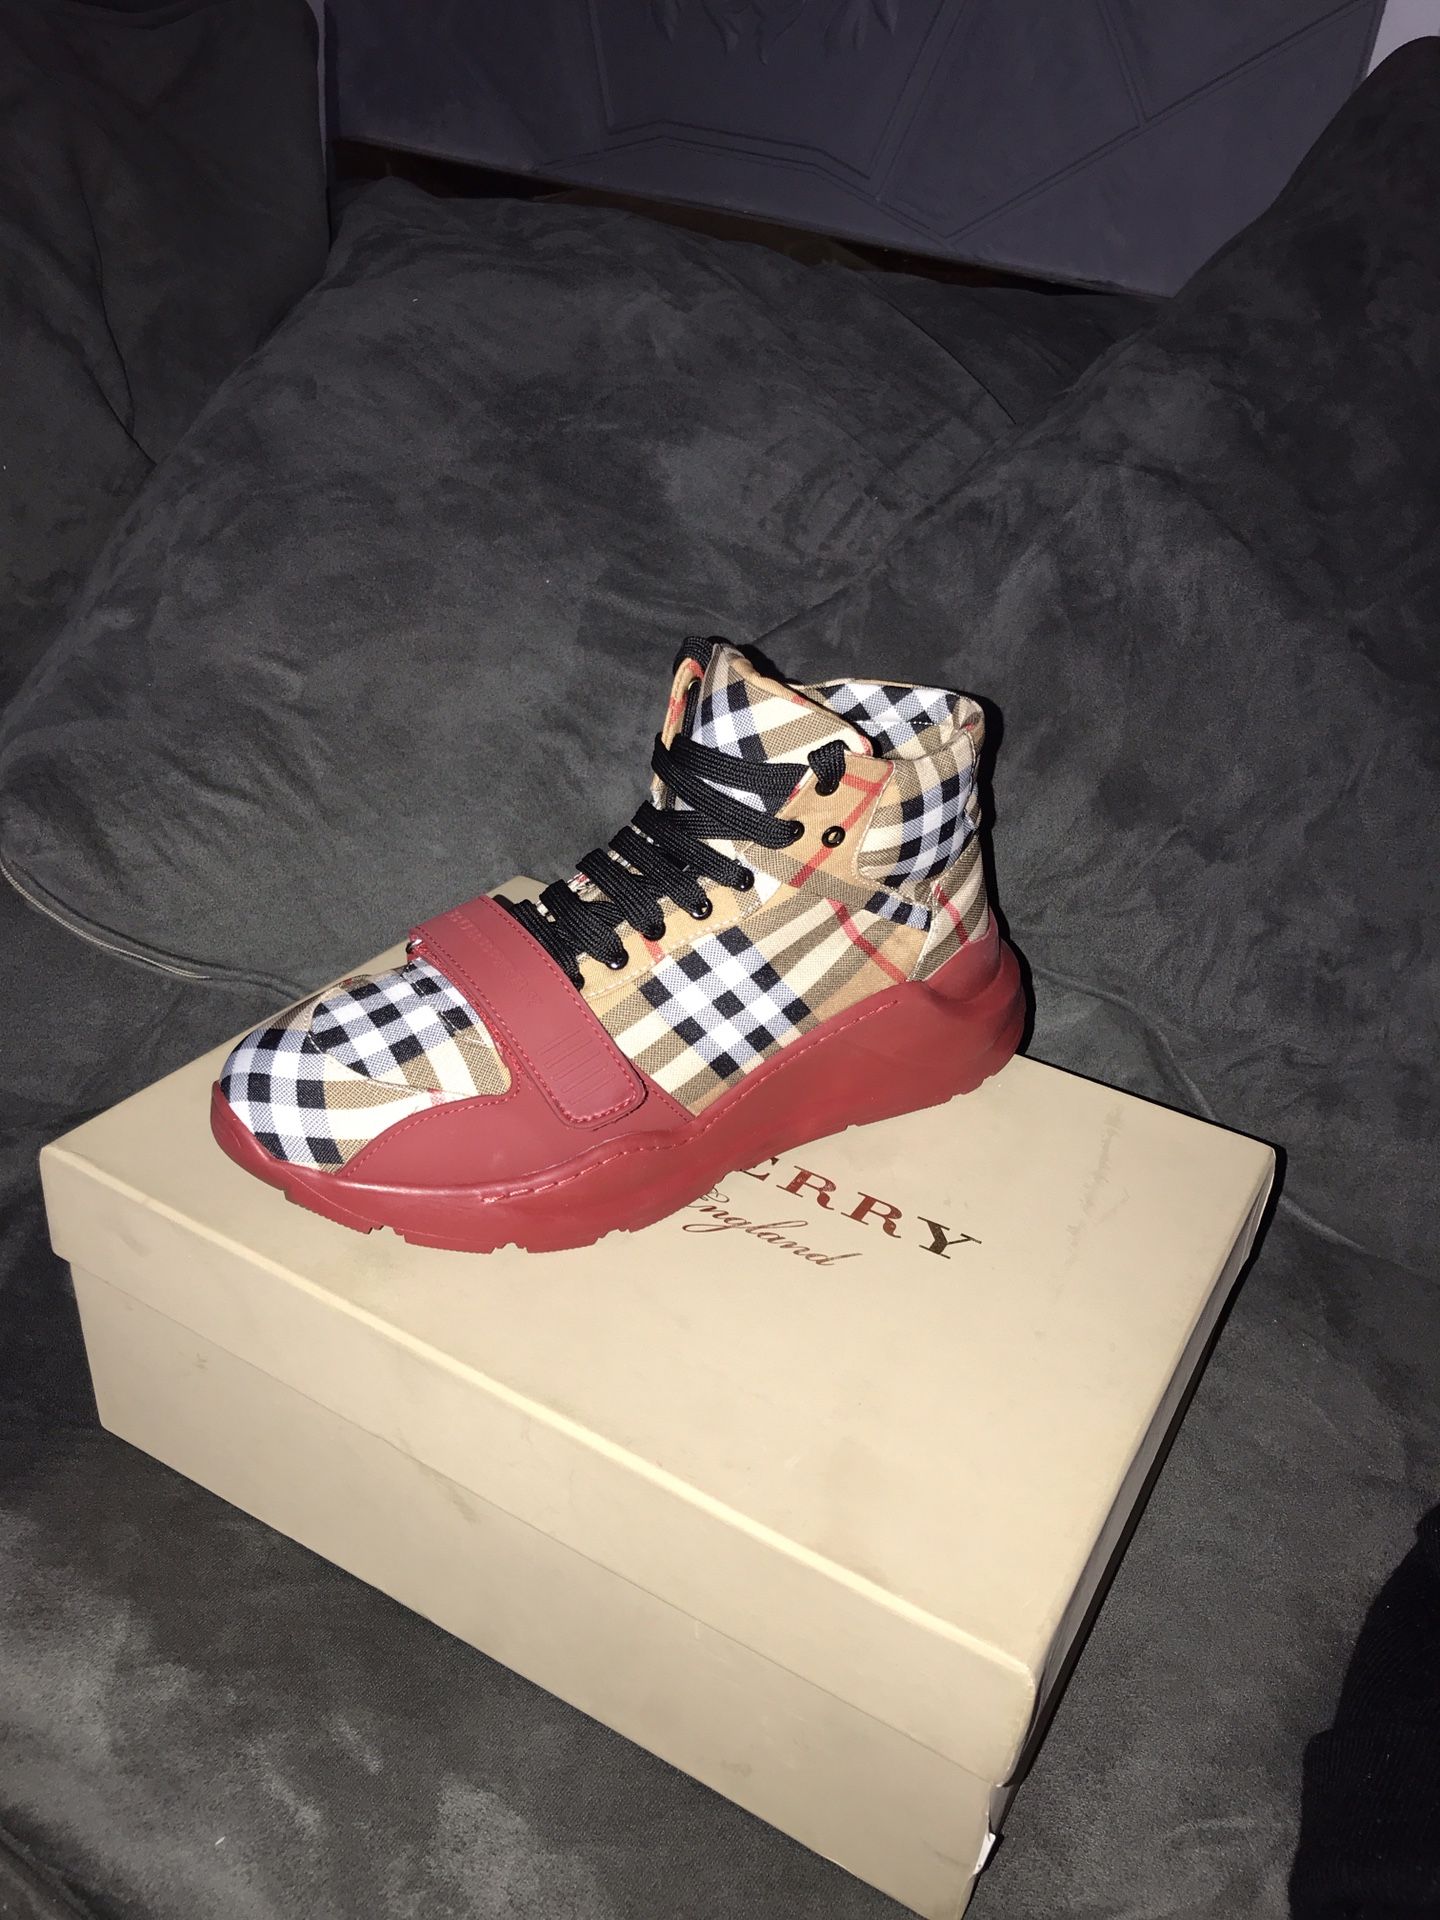 New Burberry size 10